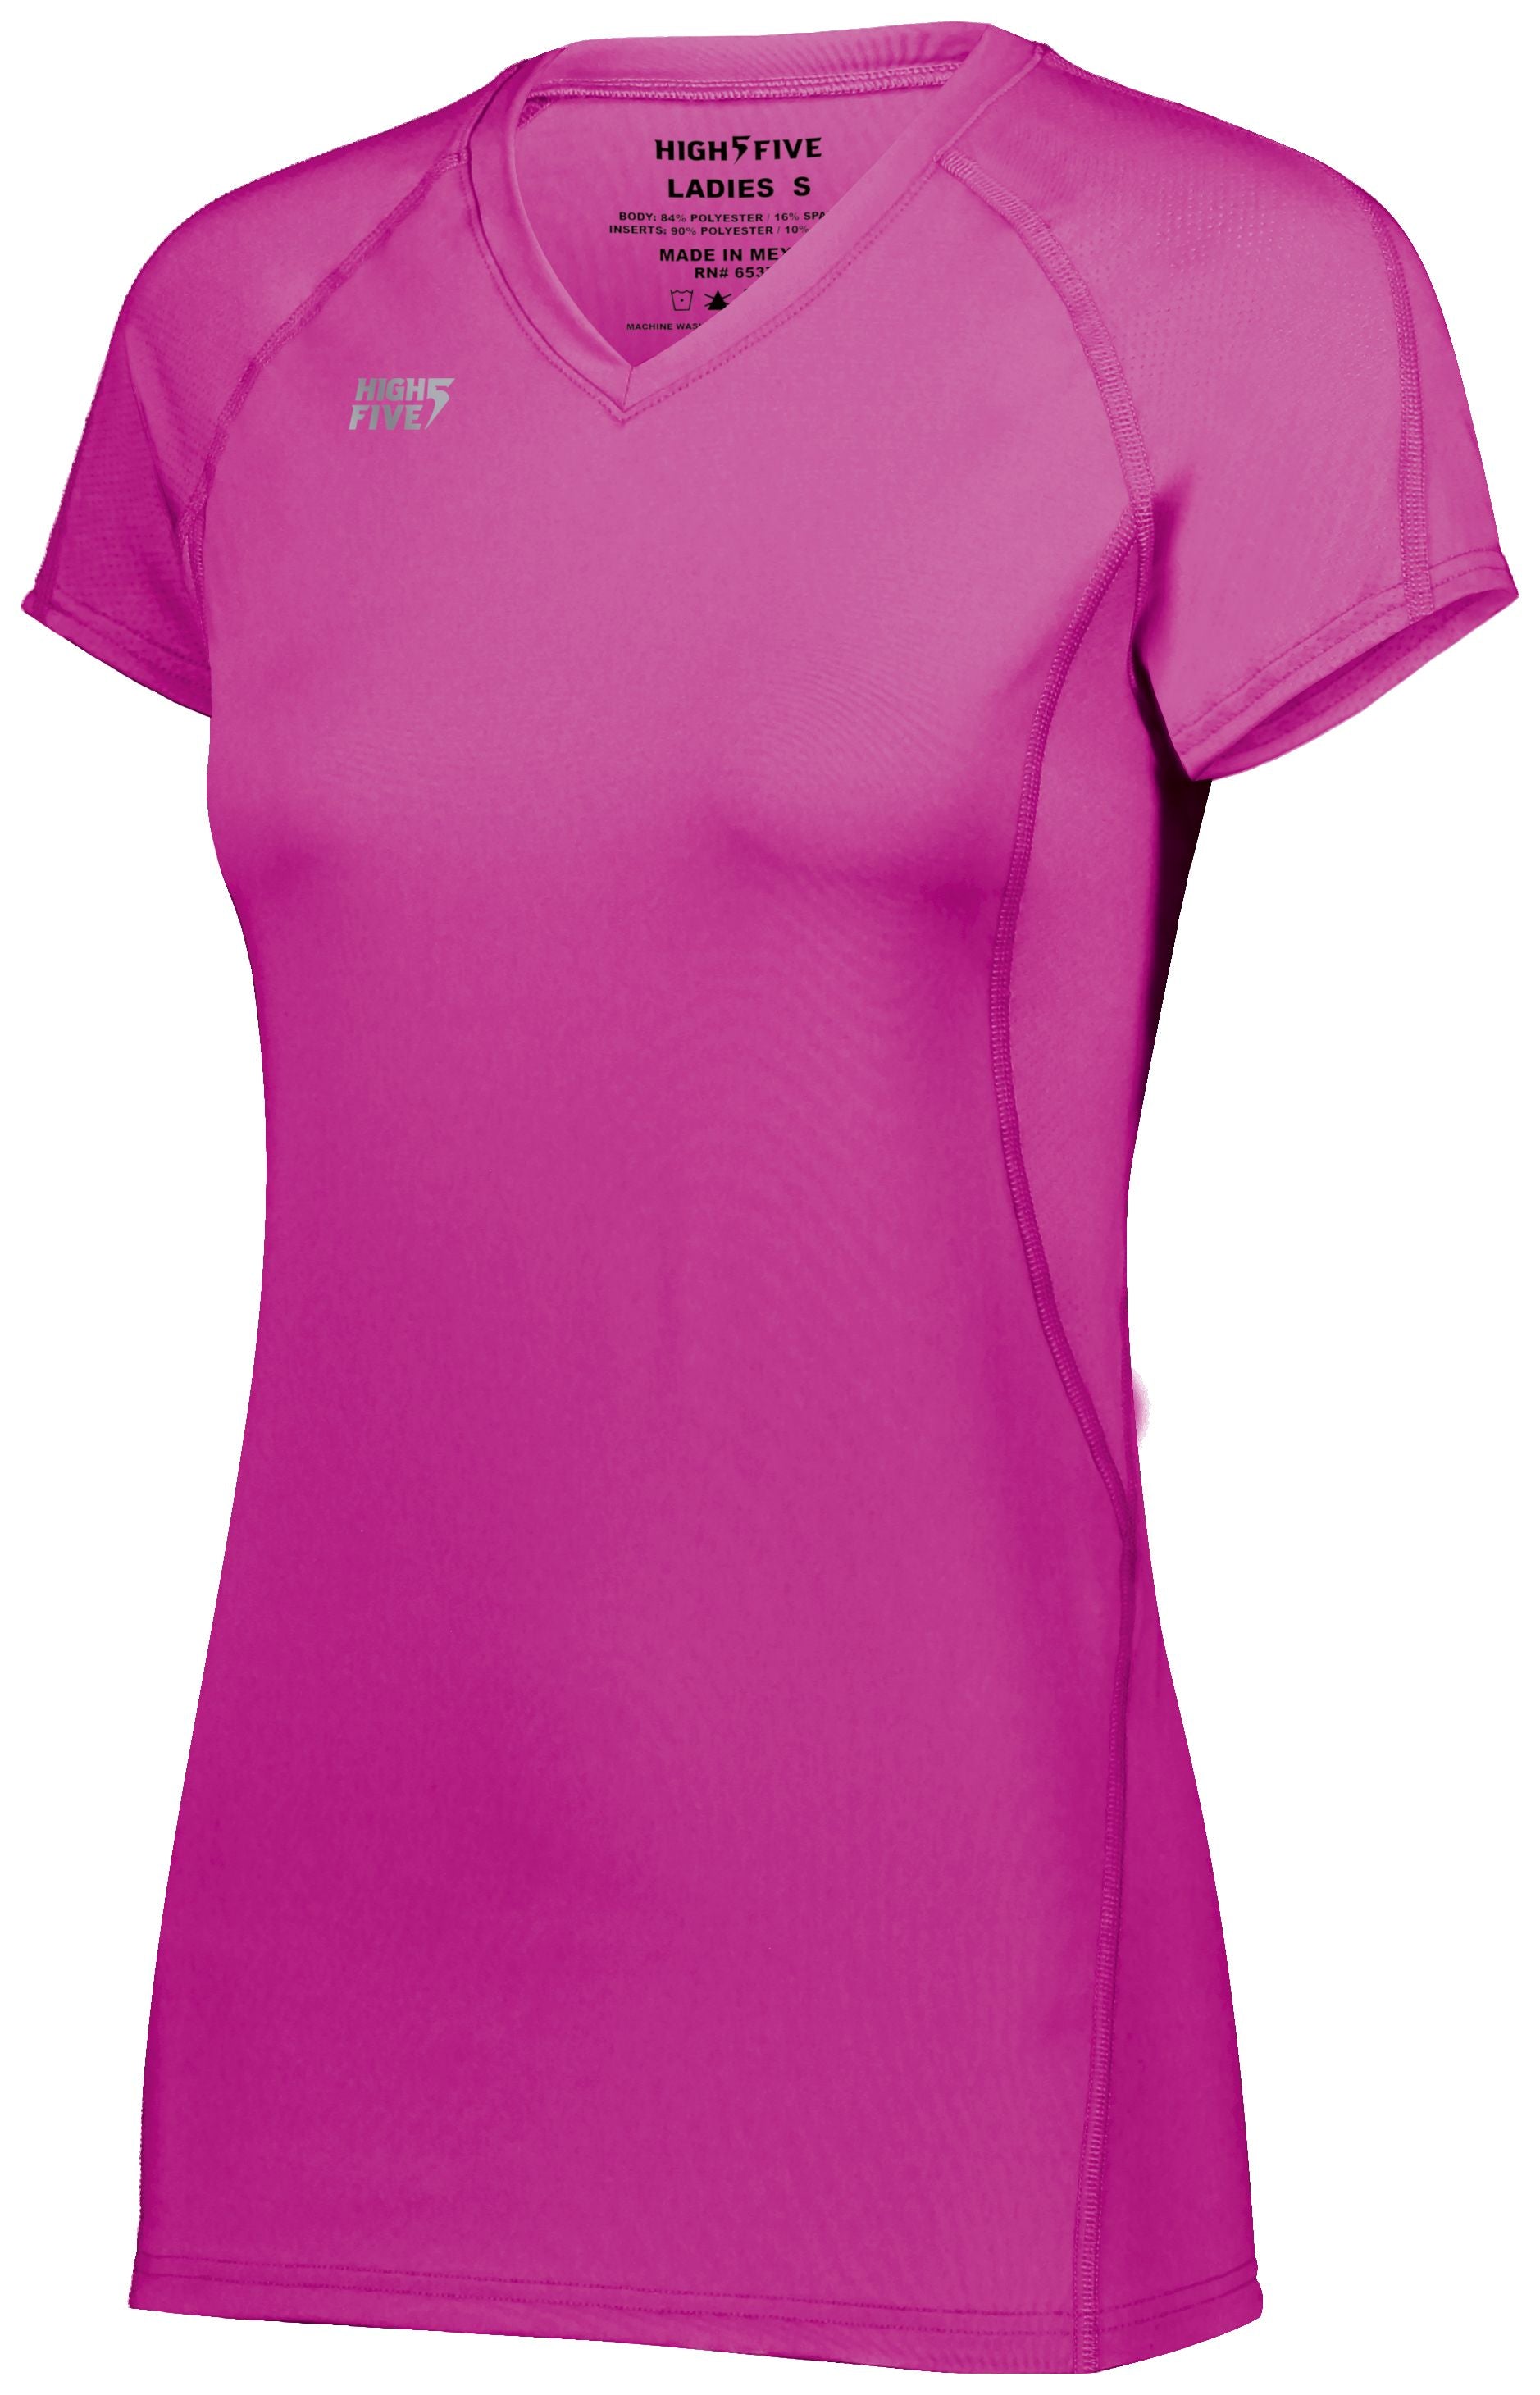 High 5 Girls Truhit Short Sleeve Jersey in Power Pink  -Part of the Girls, High5-Products, Volleyball, Girls-Jersey, Shirts product lines at KanaleyCreations.com